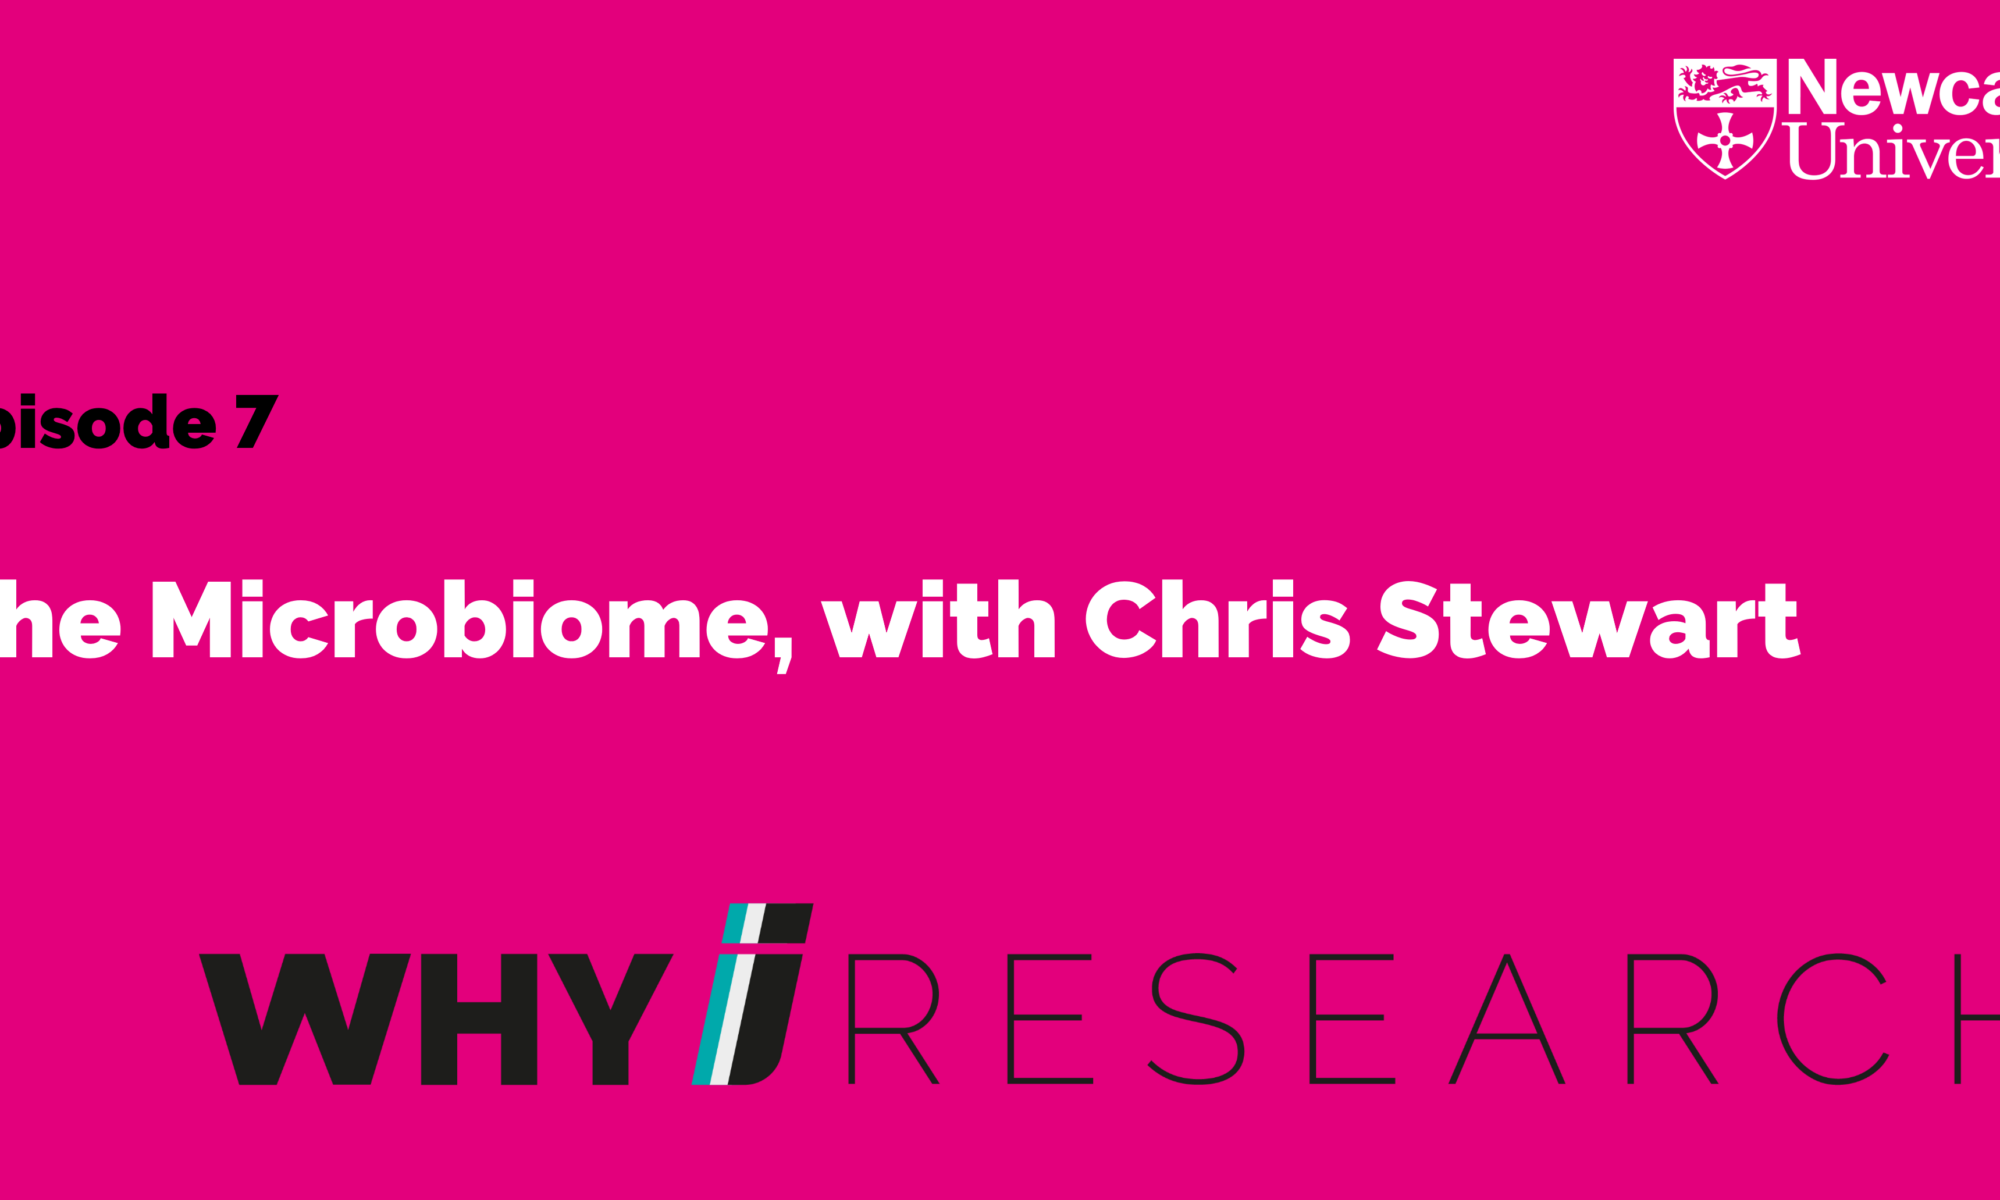 The Microbiome with Chris Stewart